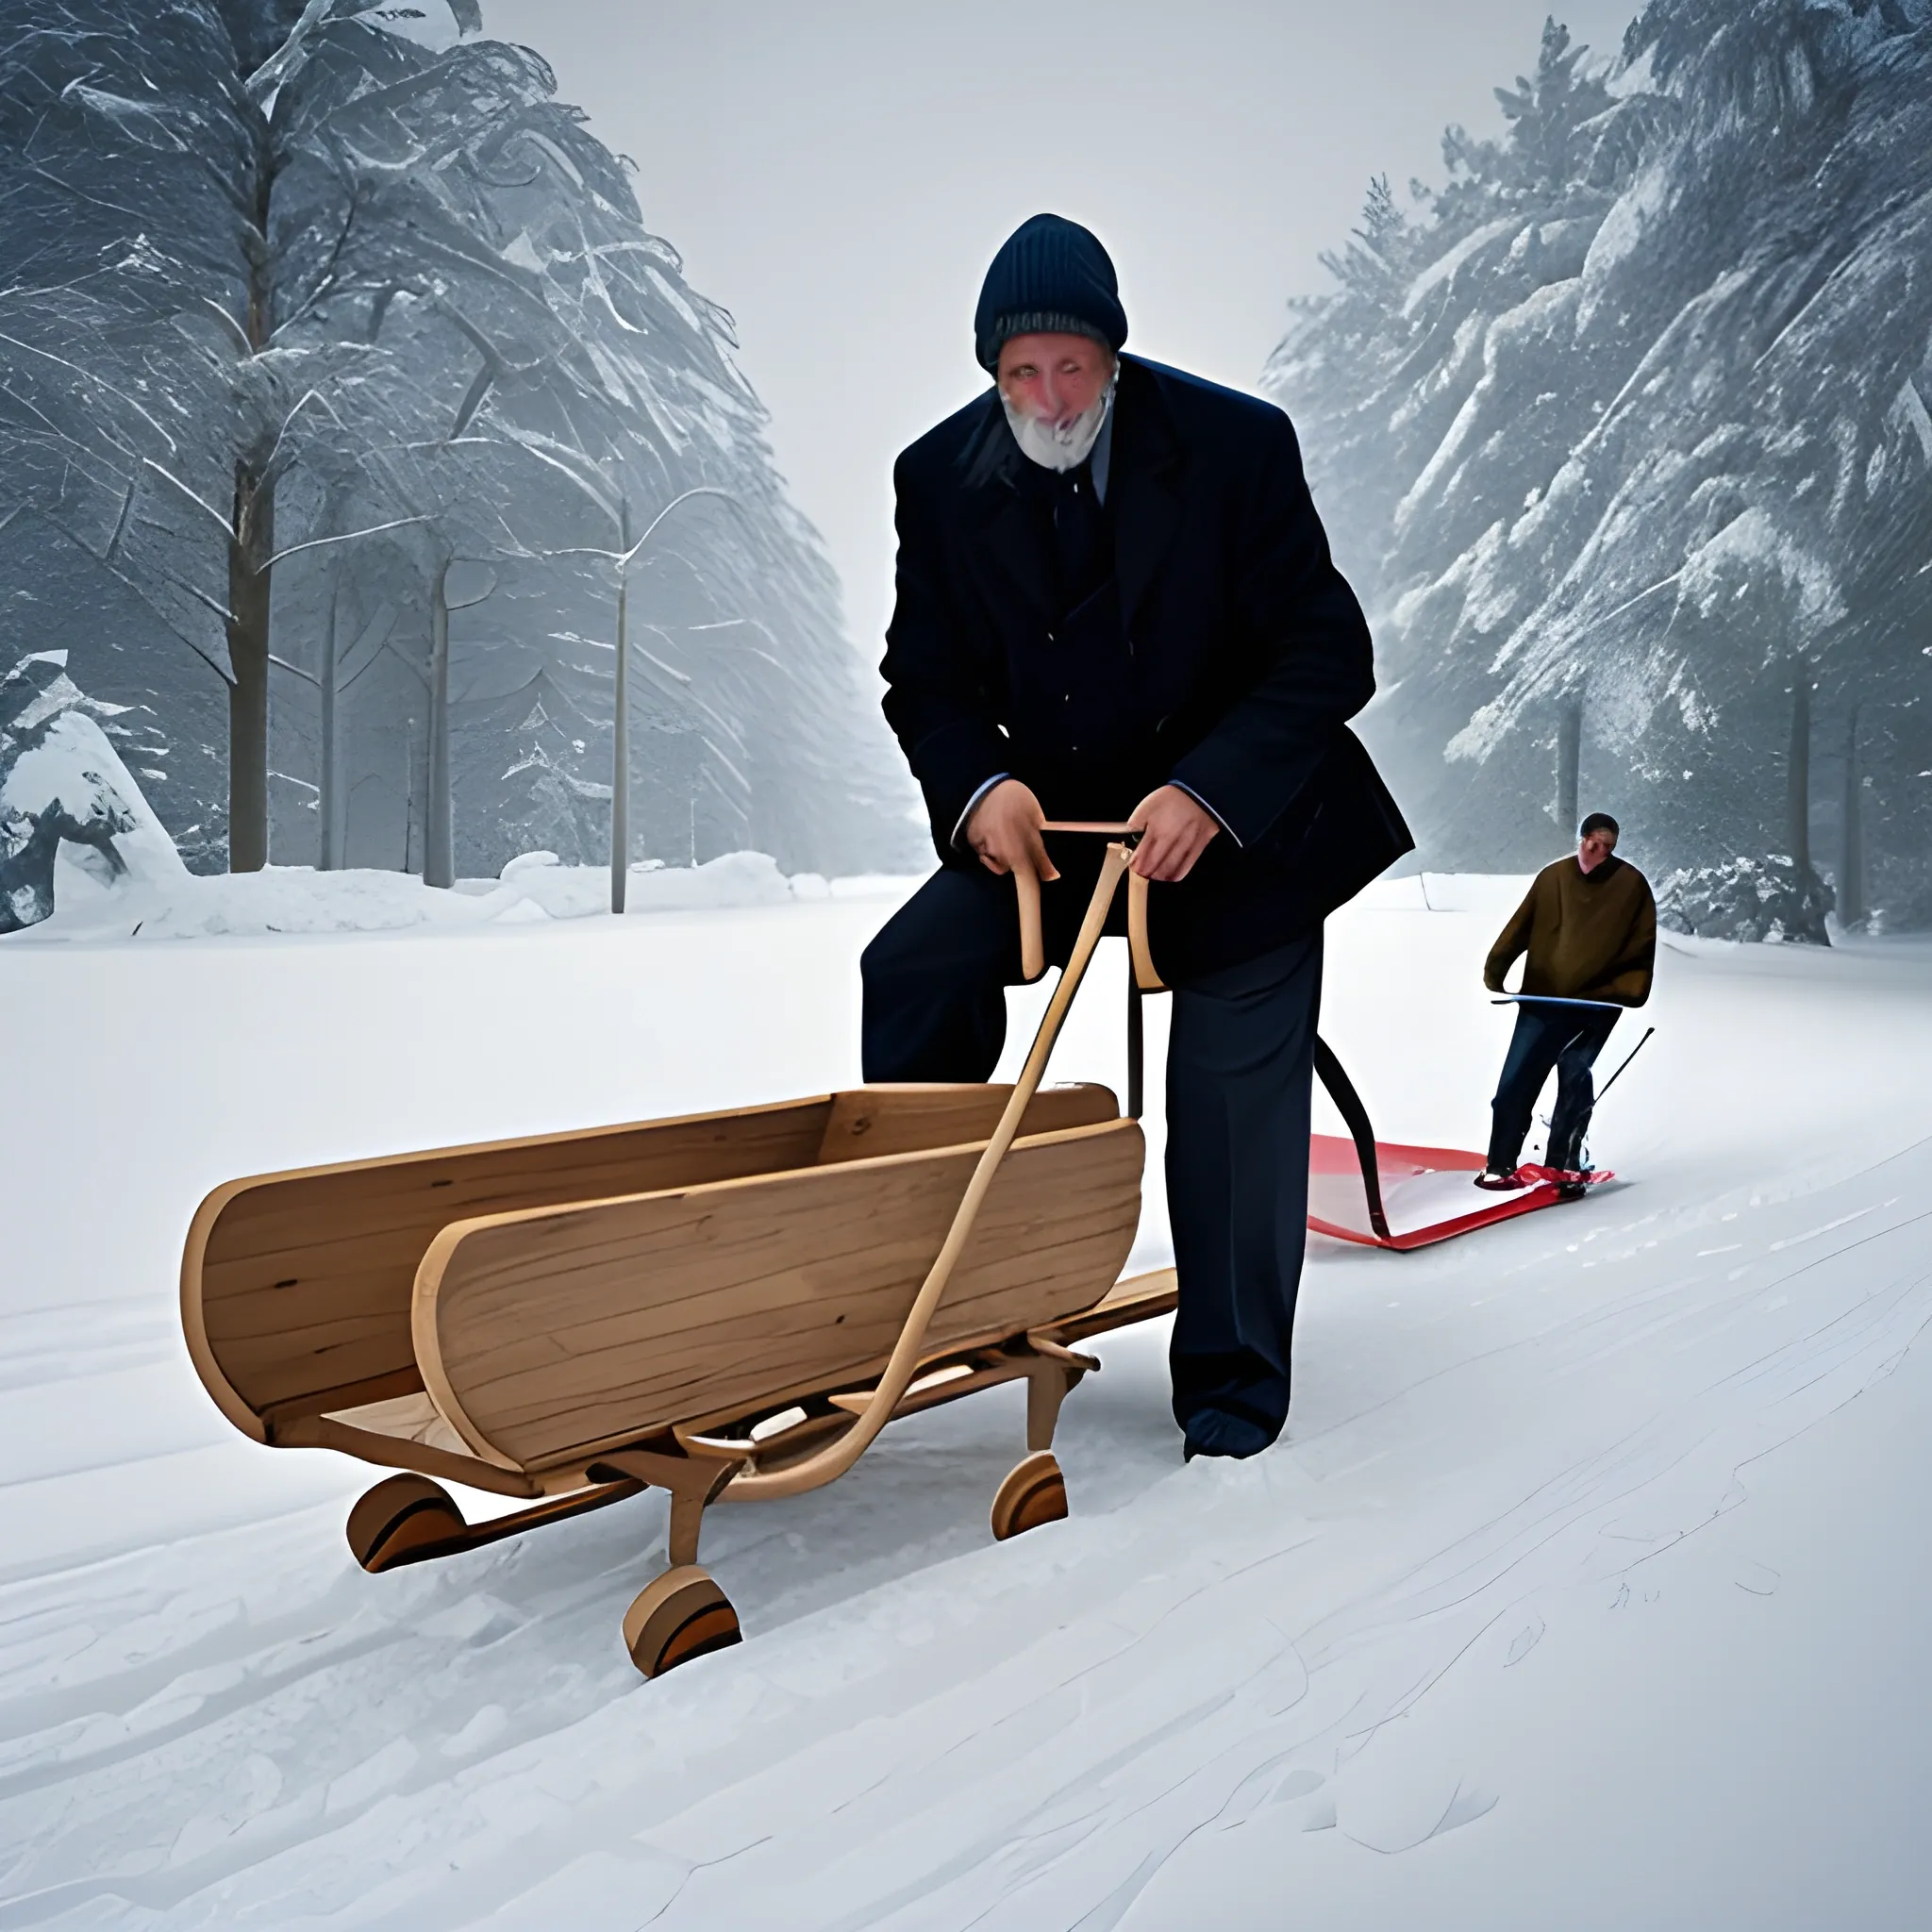  man on a sledge concentrated